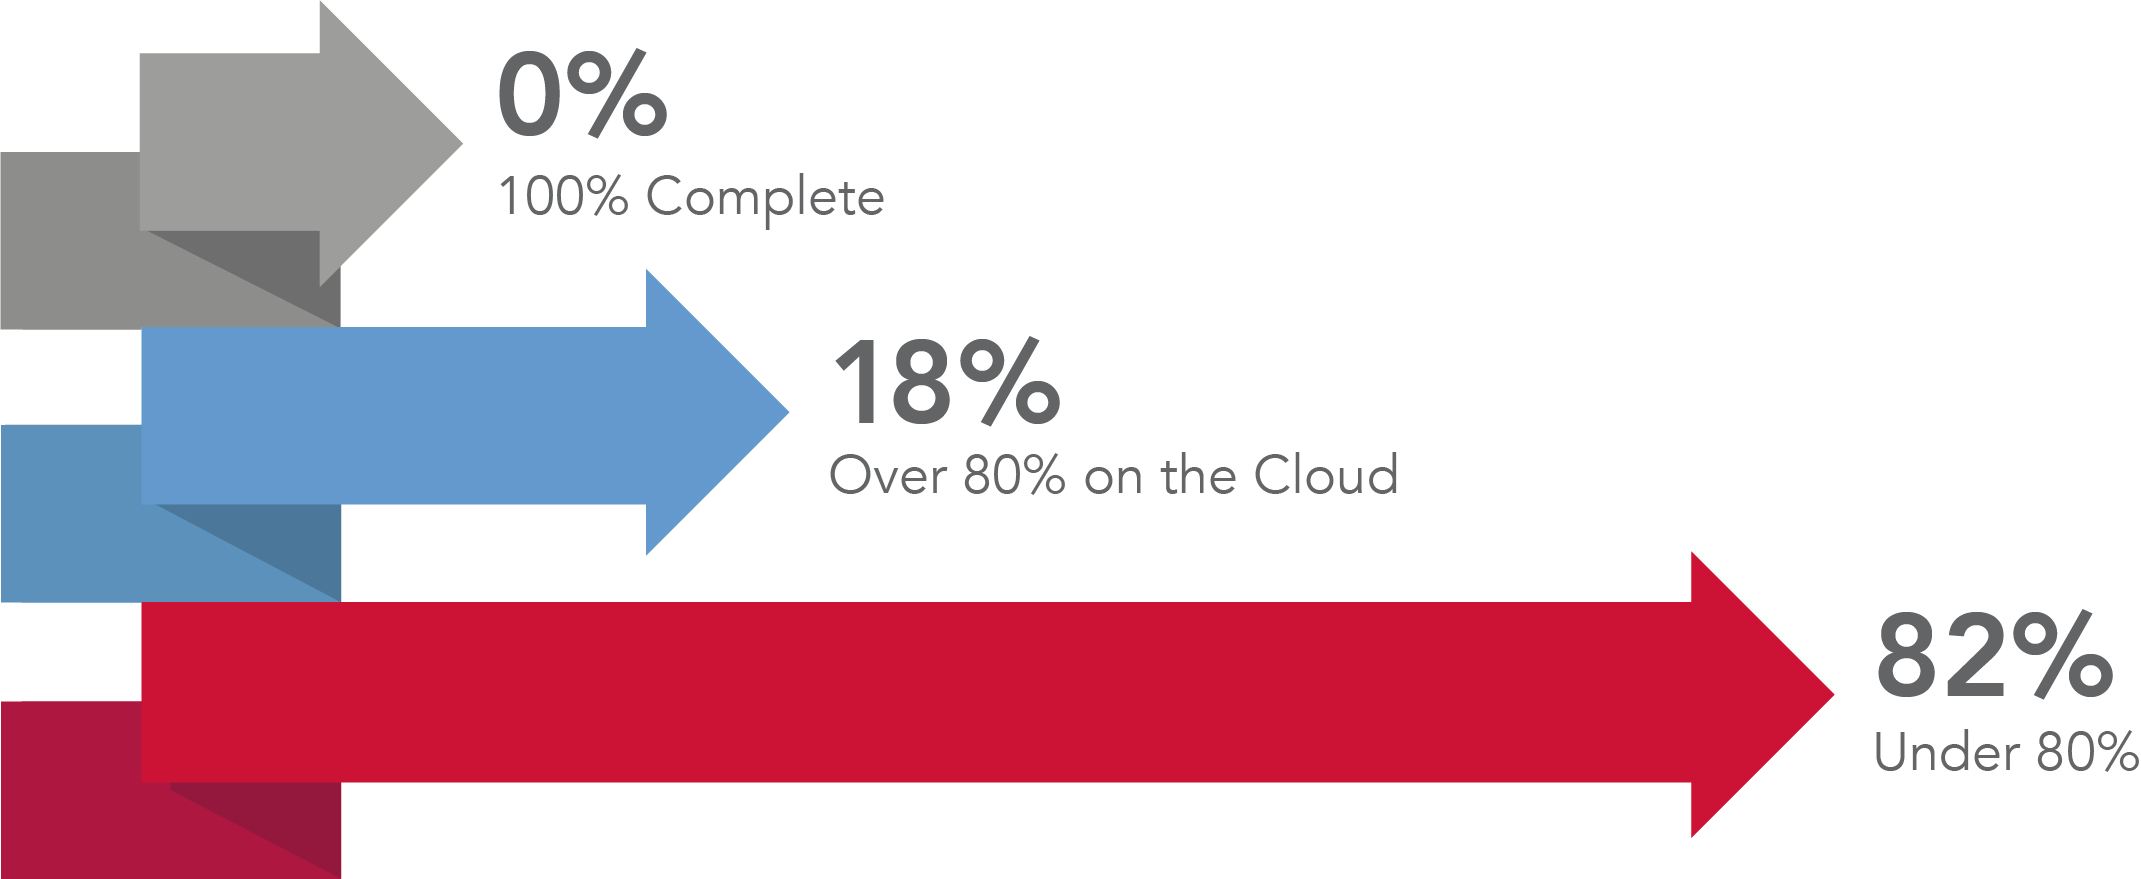 How far along are firms in their cloud migration?